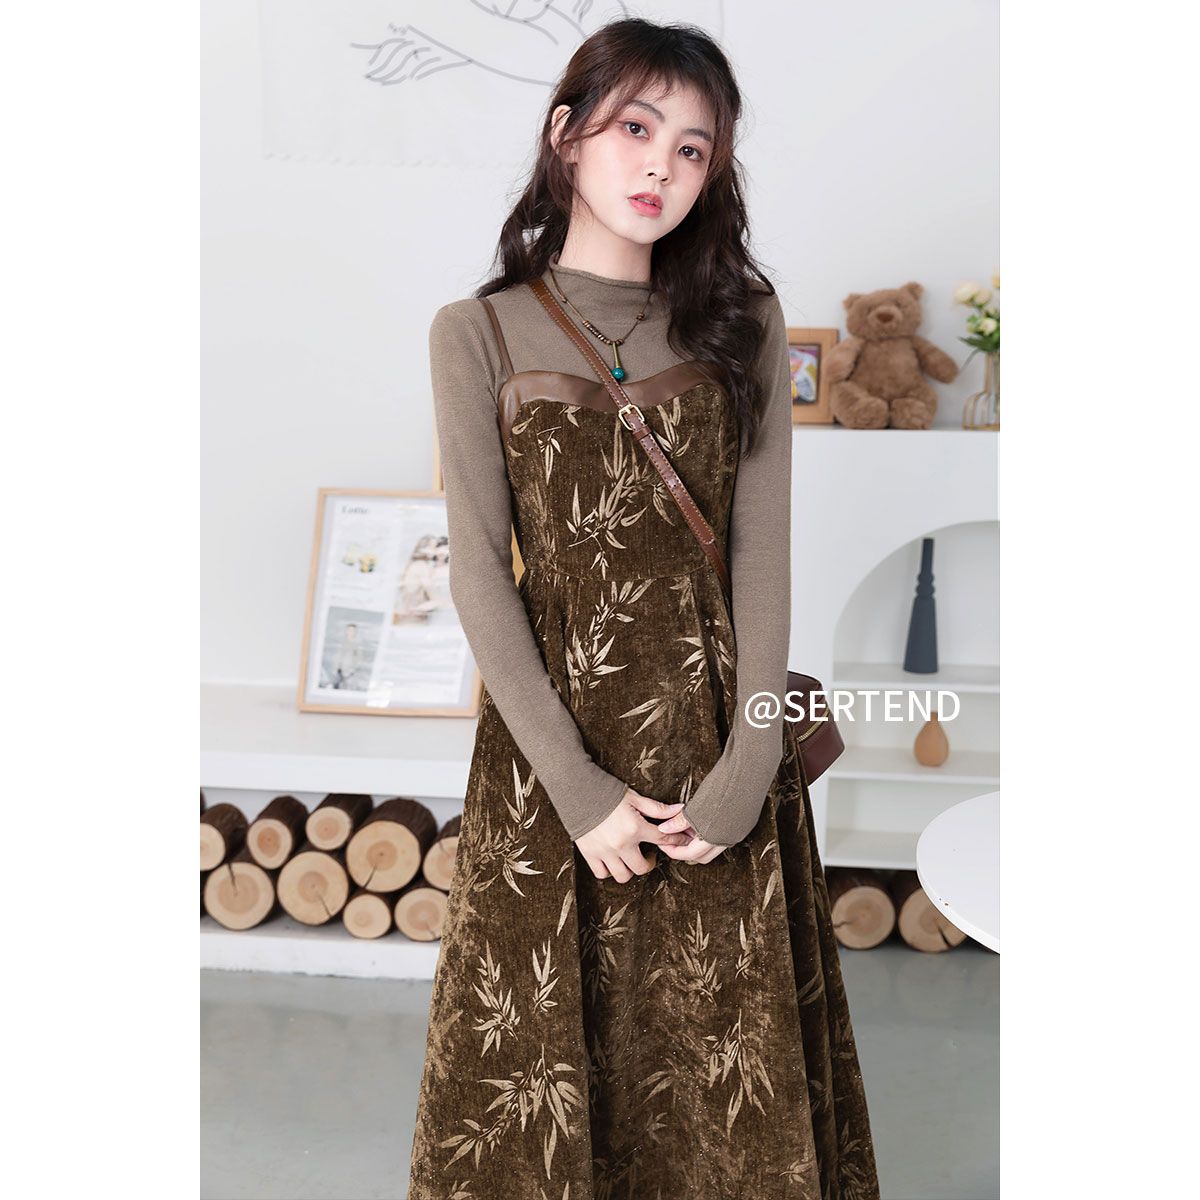 SERTEND autumn winter annual meeting fine glitters with dress thickened Broken Flowers pendant with skirt Undershirt Two Sets Women Suit-Taobao